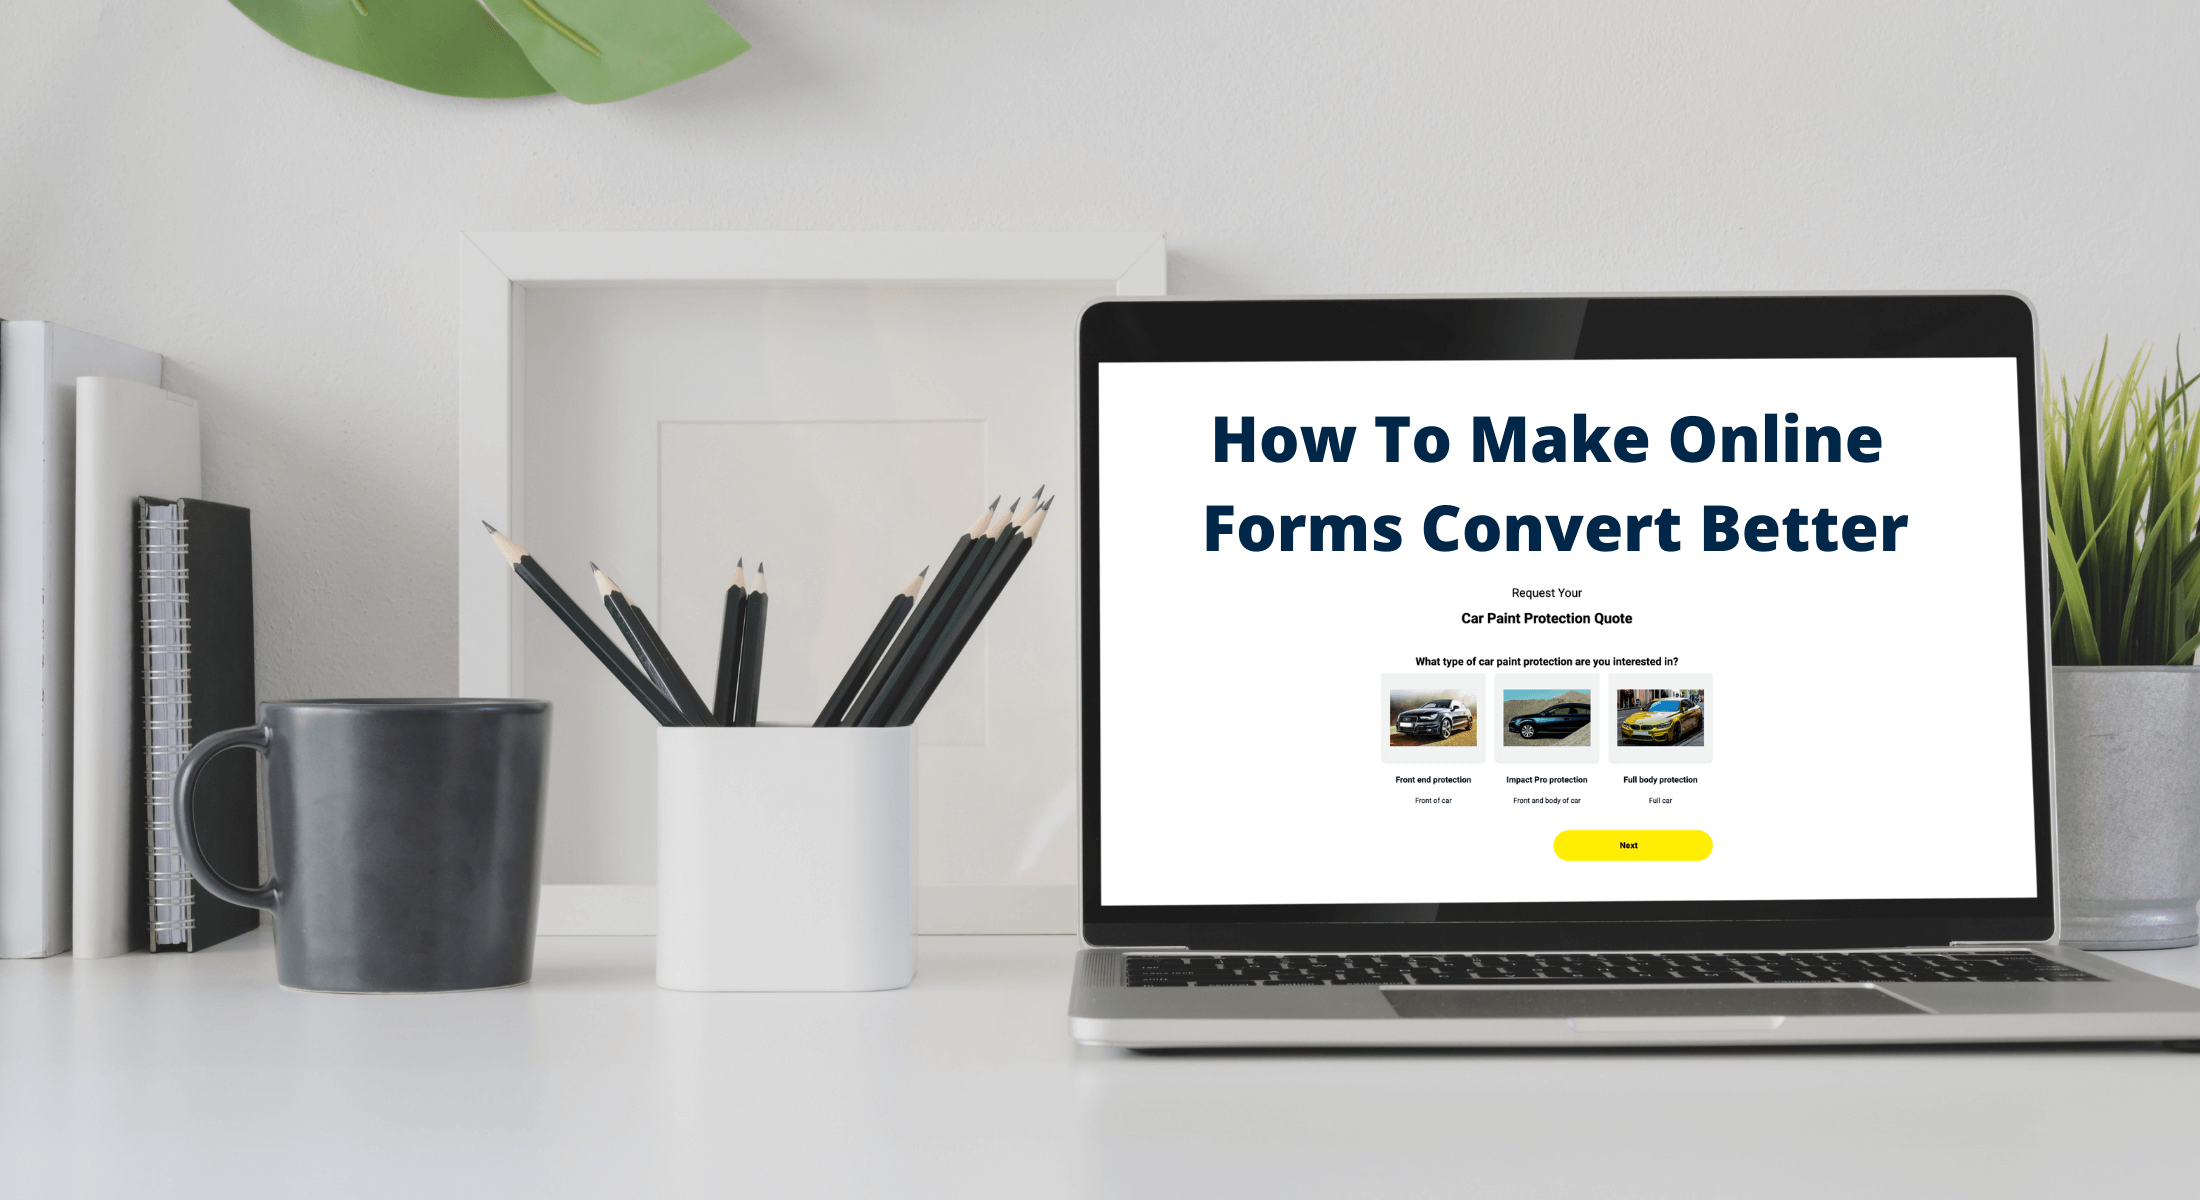 How To Make Online Forms Convert Better